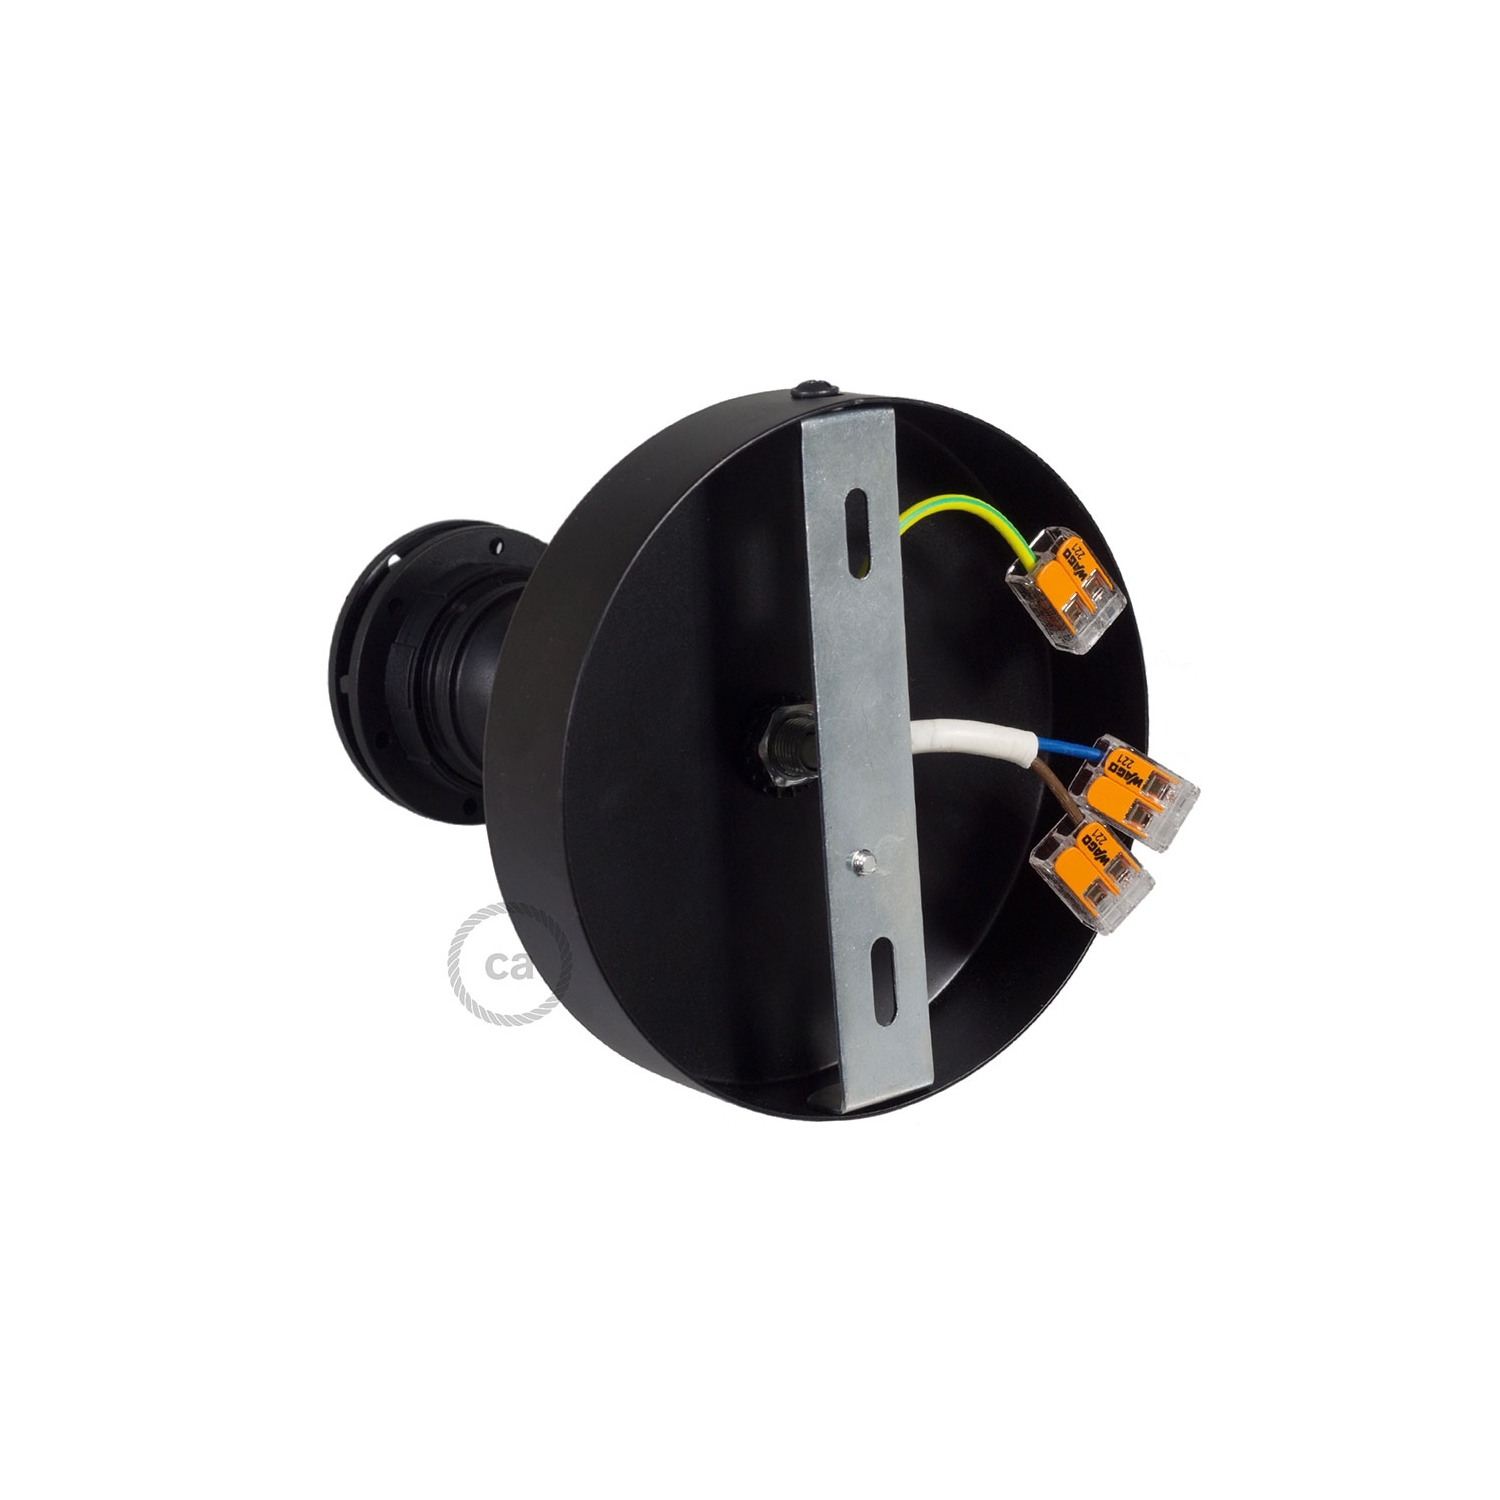 Fermaluce Metallo 90° Black adjustable, with E26 threaded lamp holder, the metal wall or ceiling light source